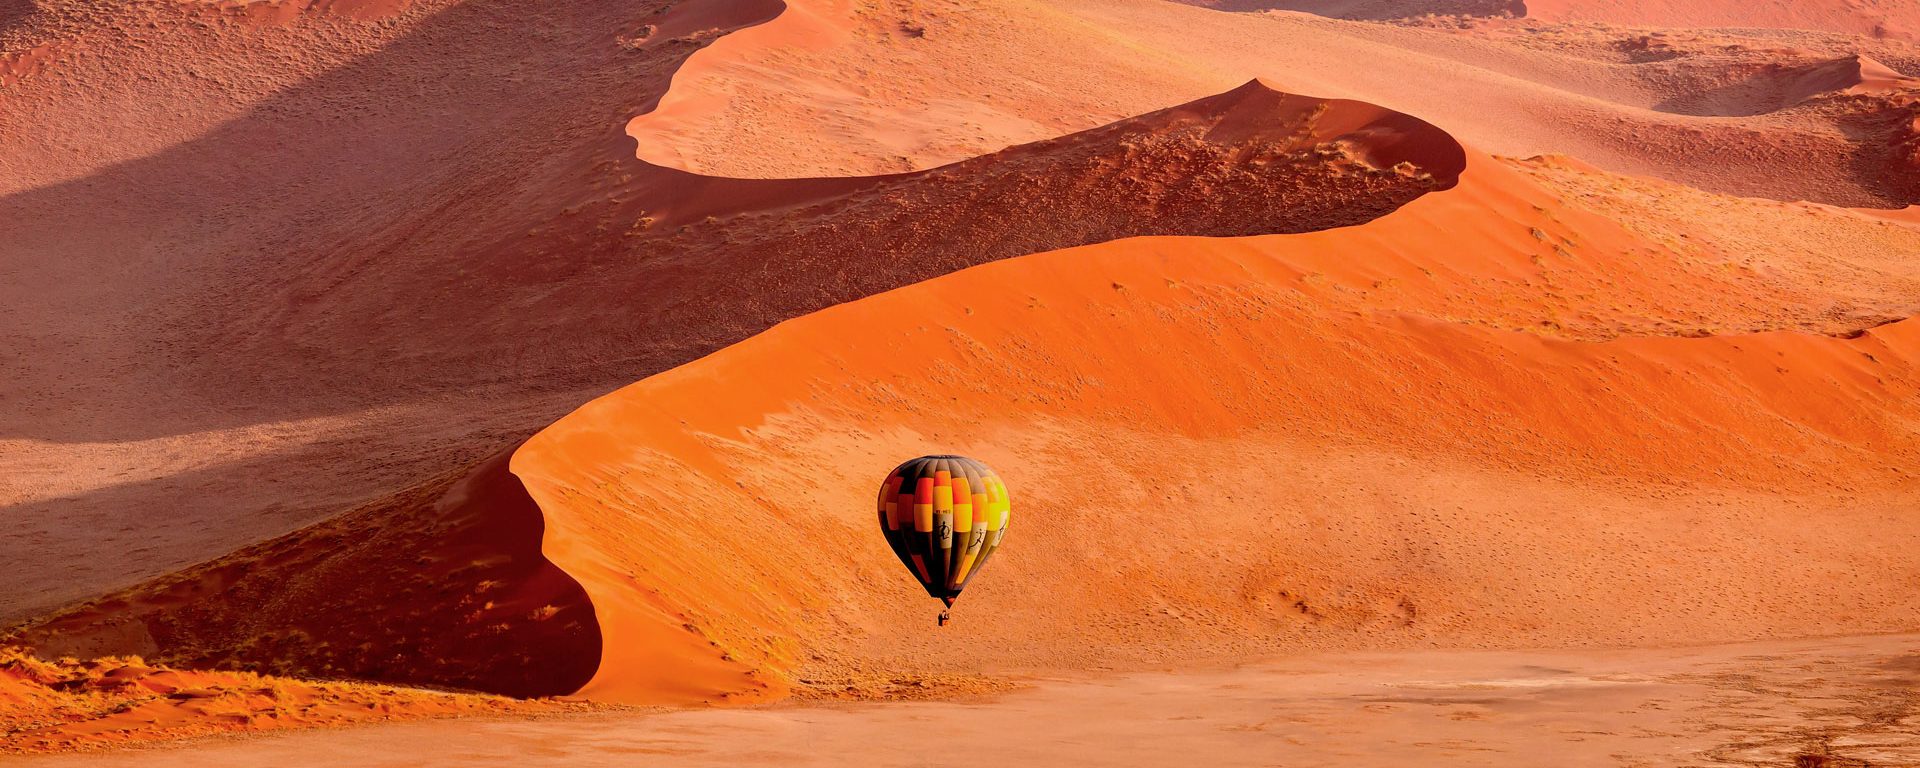 A hot air balloon floats across dunes in Namibia